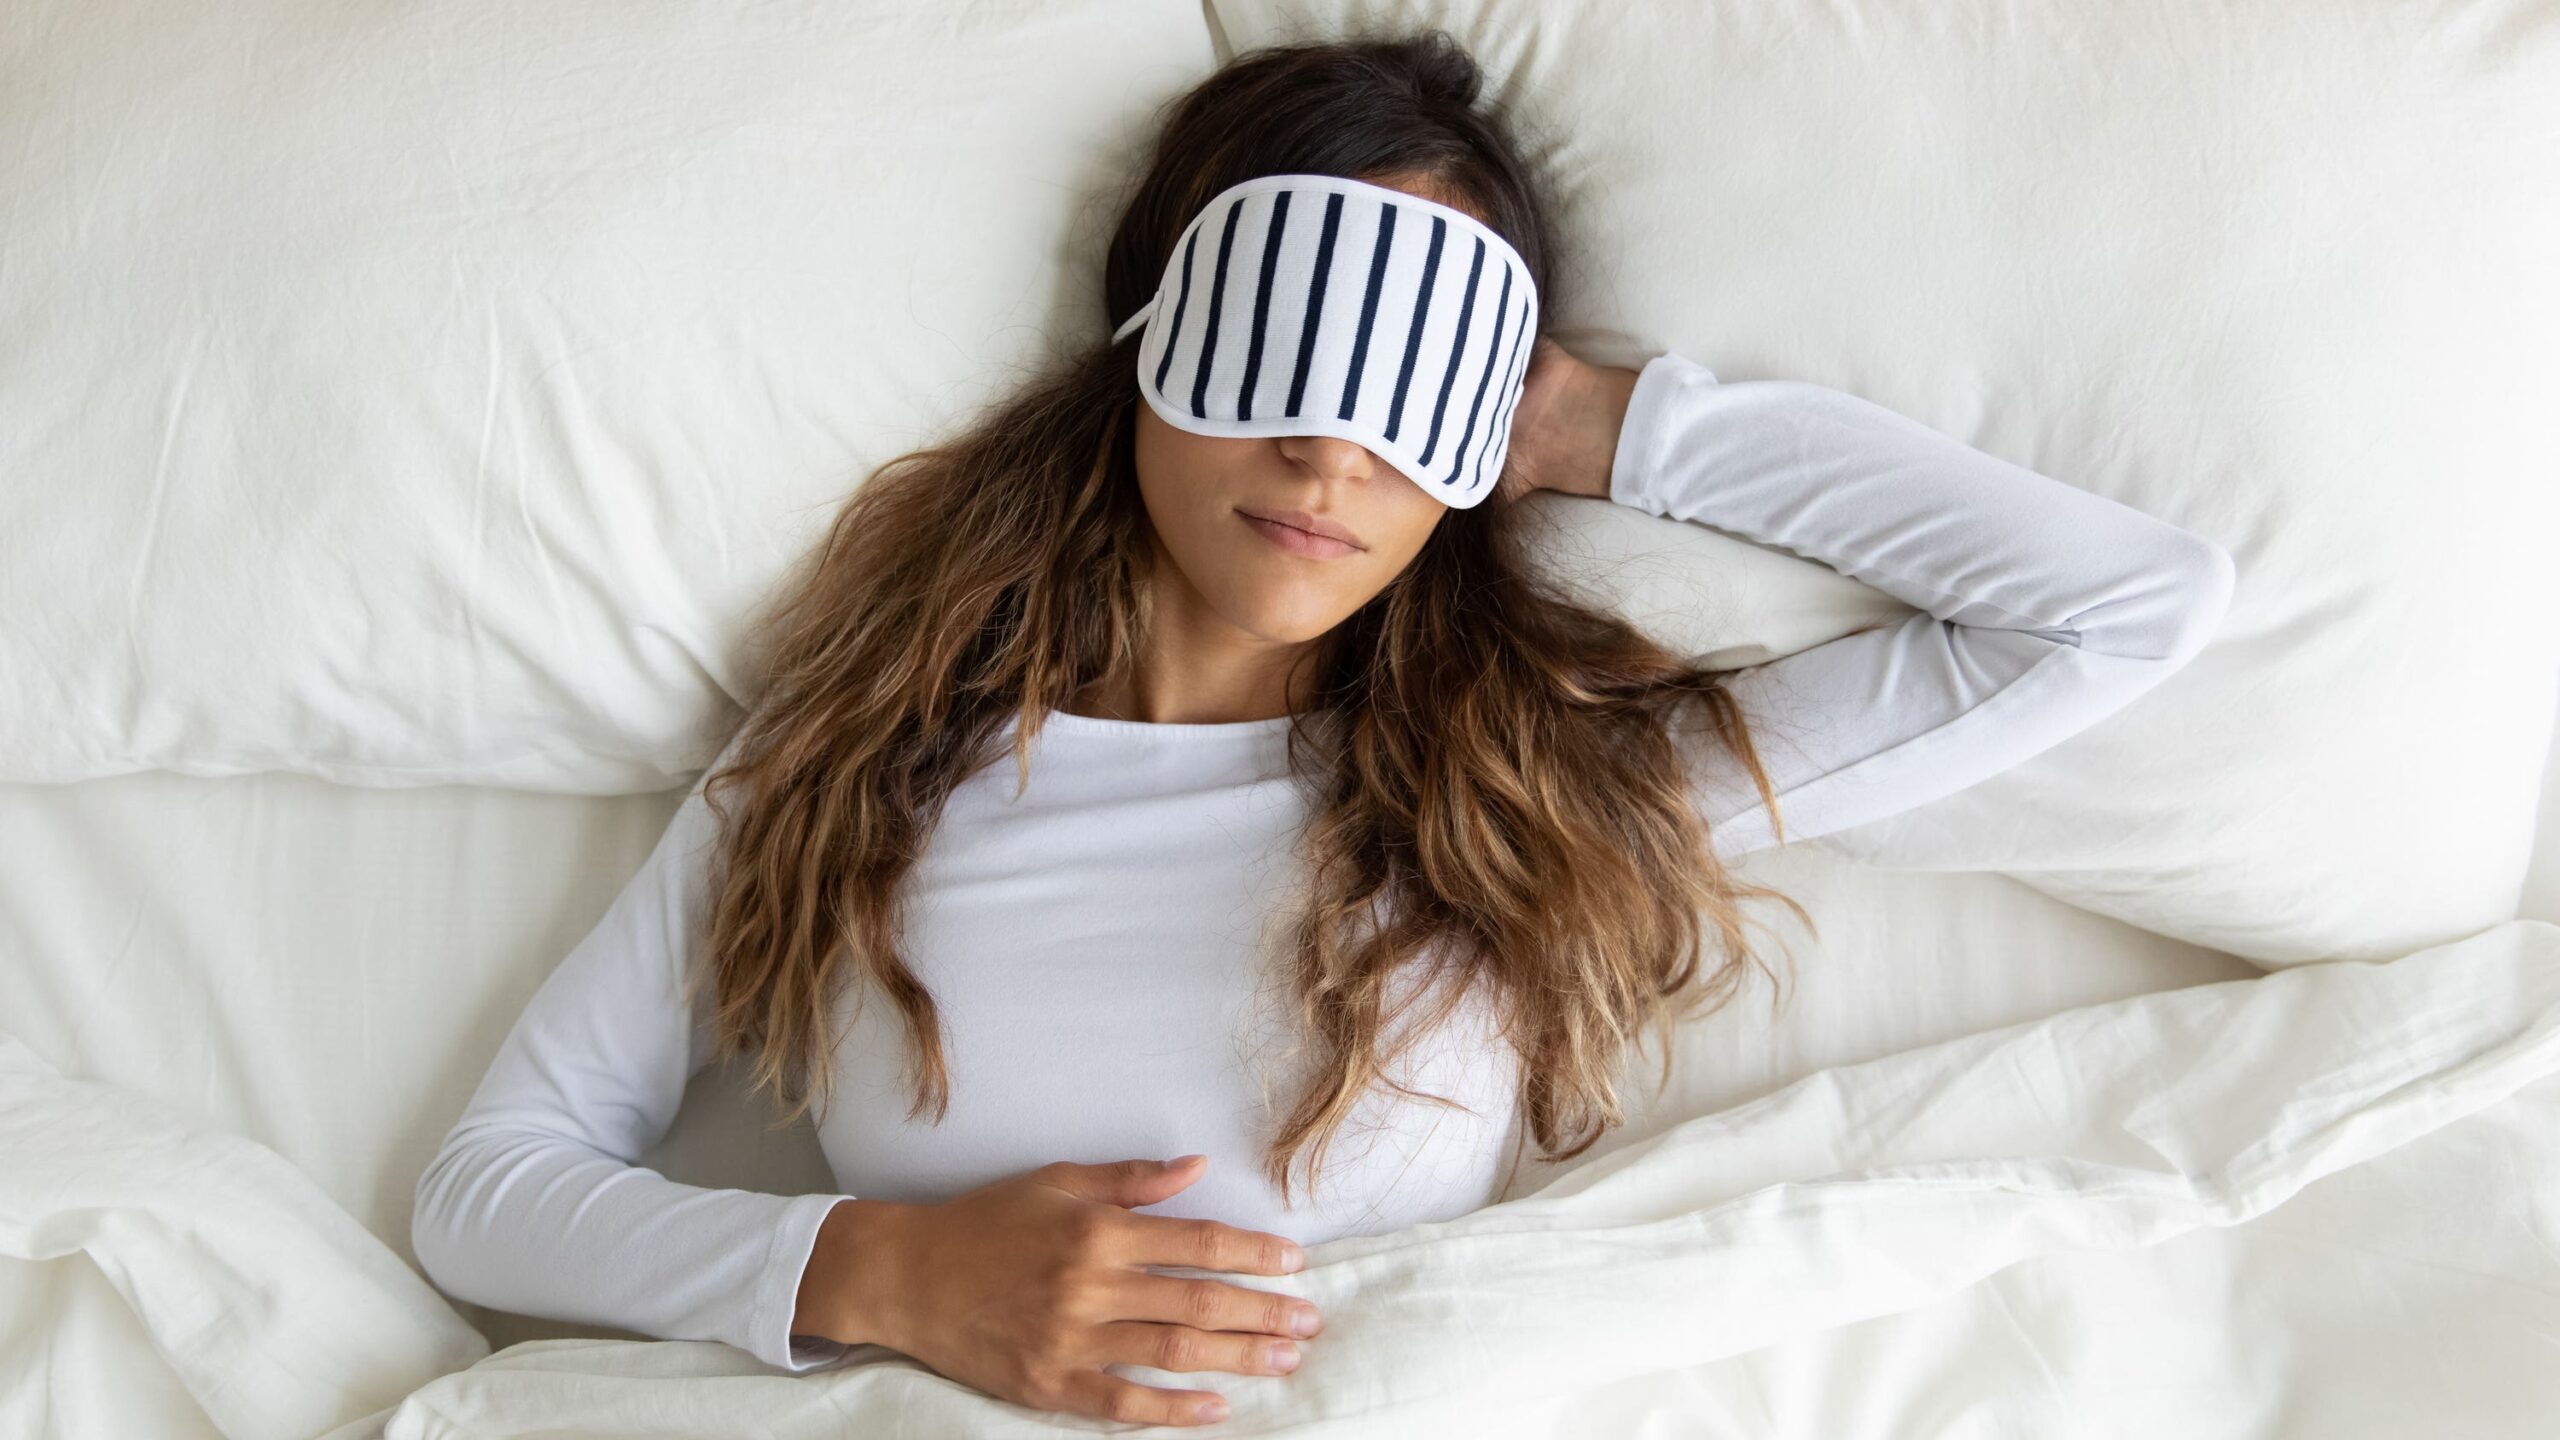 Things That Can Happen To Your Body While You’re Asleep